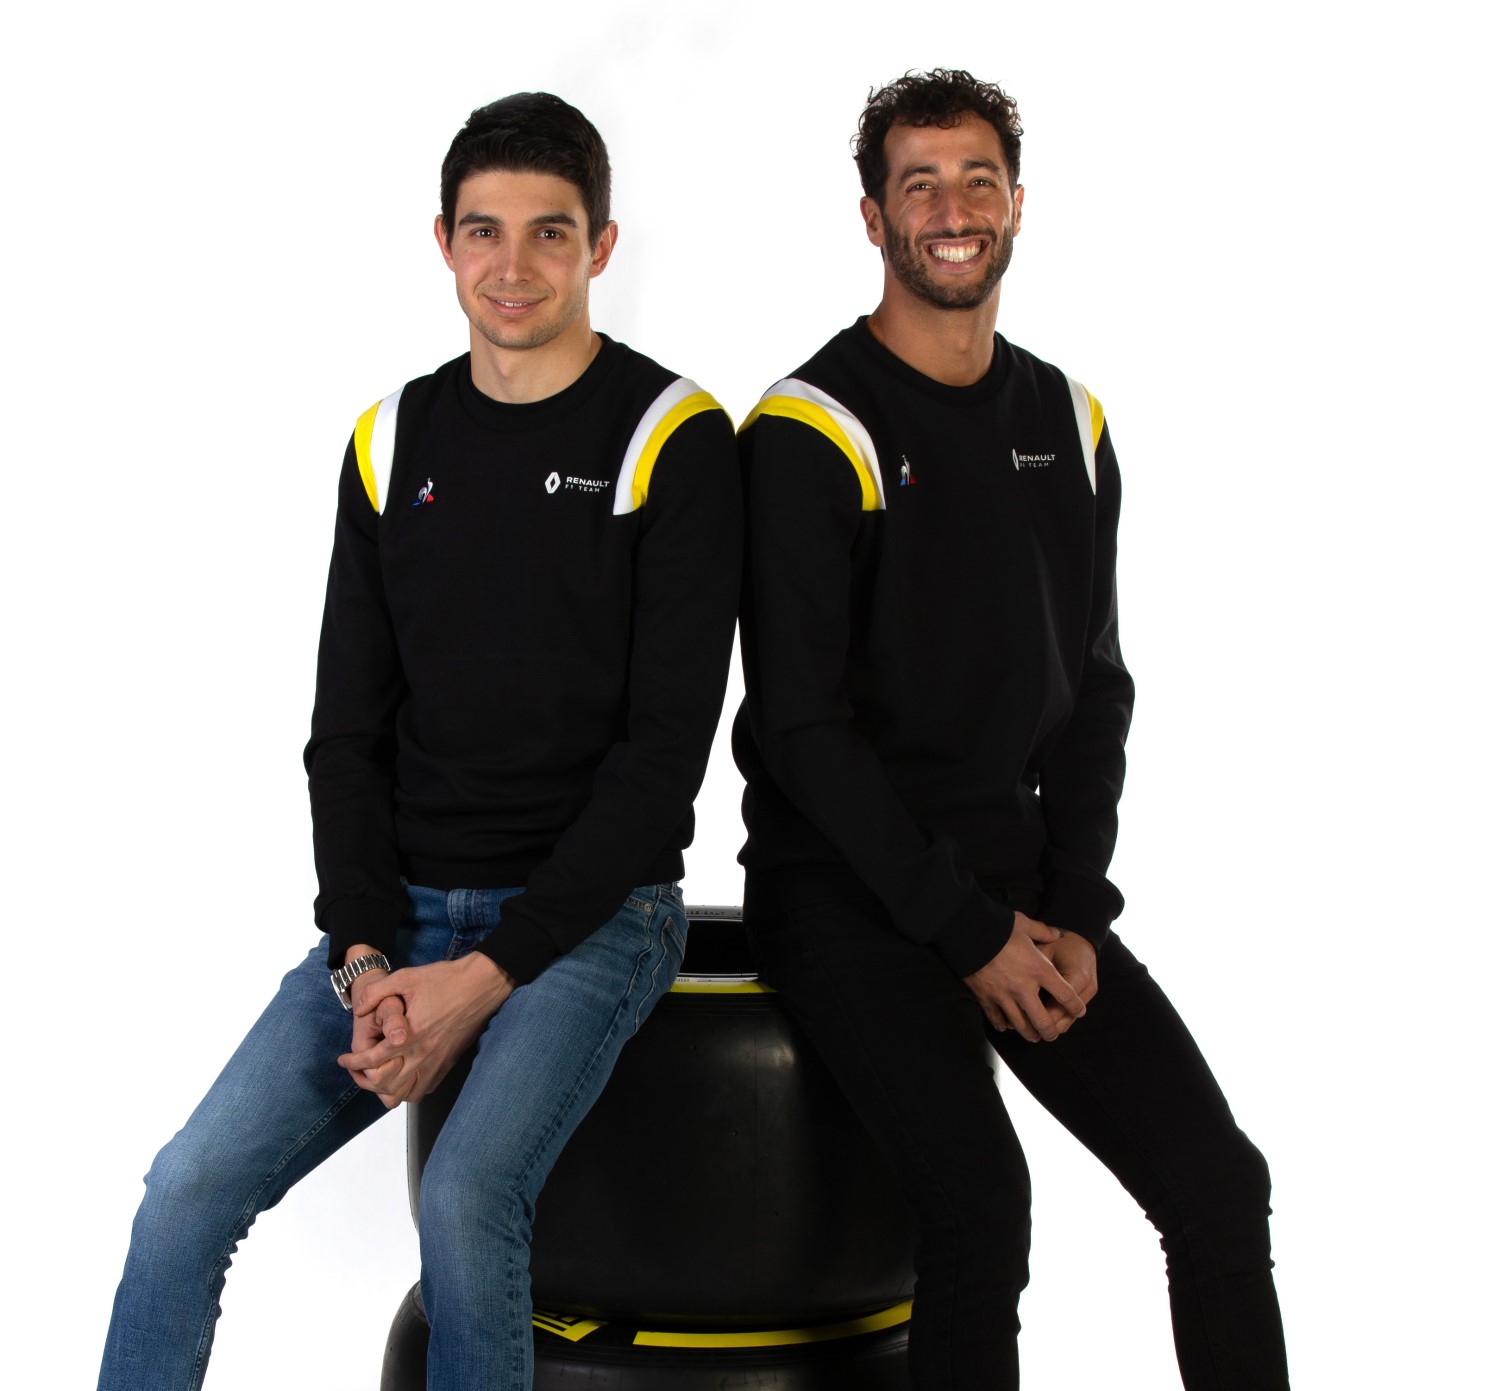 Renault drivers Ocon and Ricciardo had no car for the launch so they had to sit on a tire